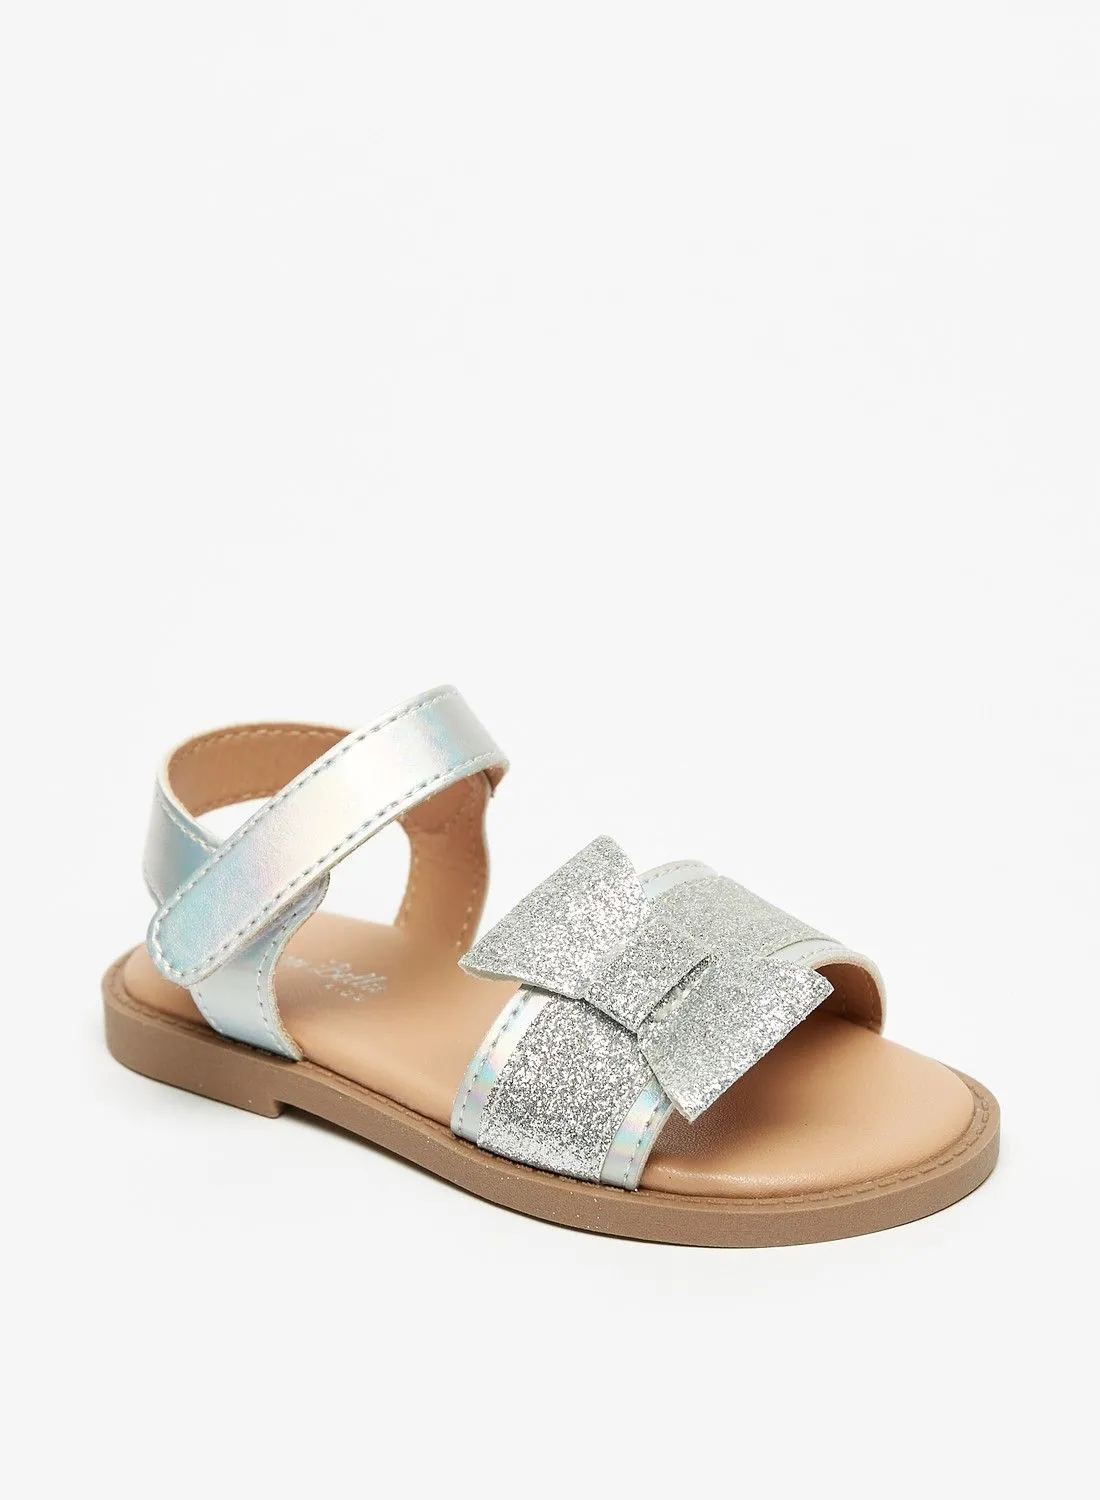 Flora Bella Glitter Textured Sandals with Hook and Loop Closure